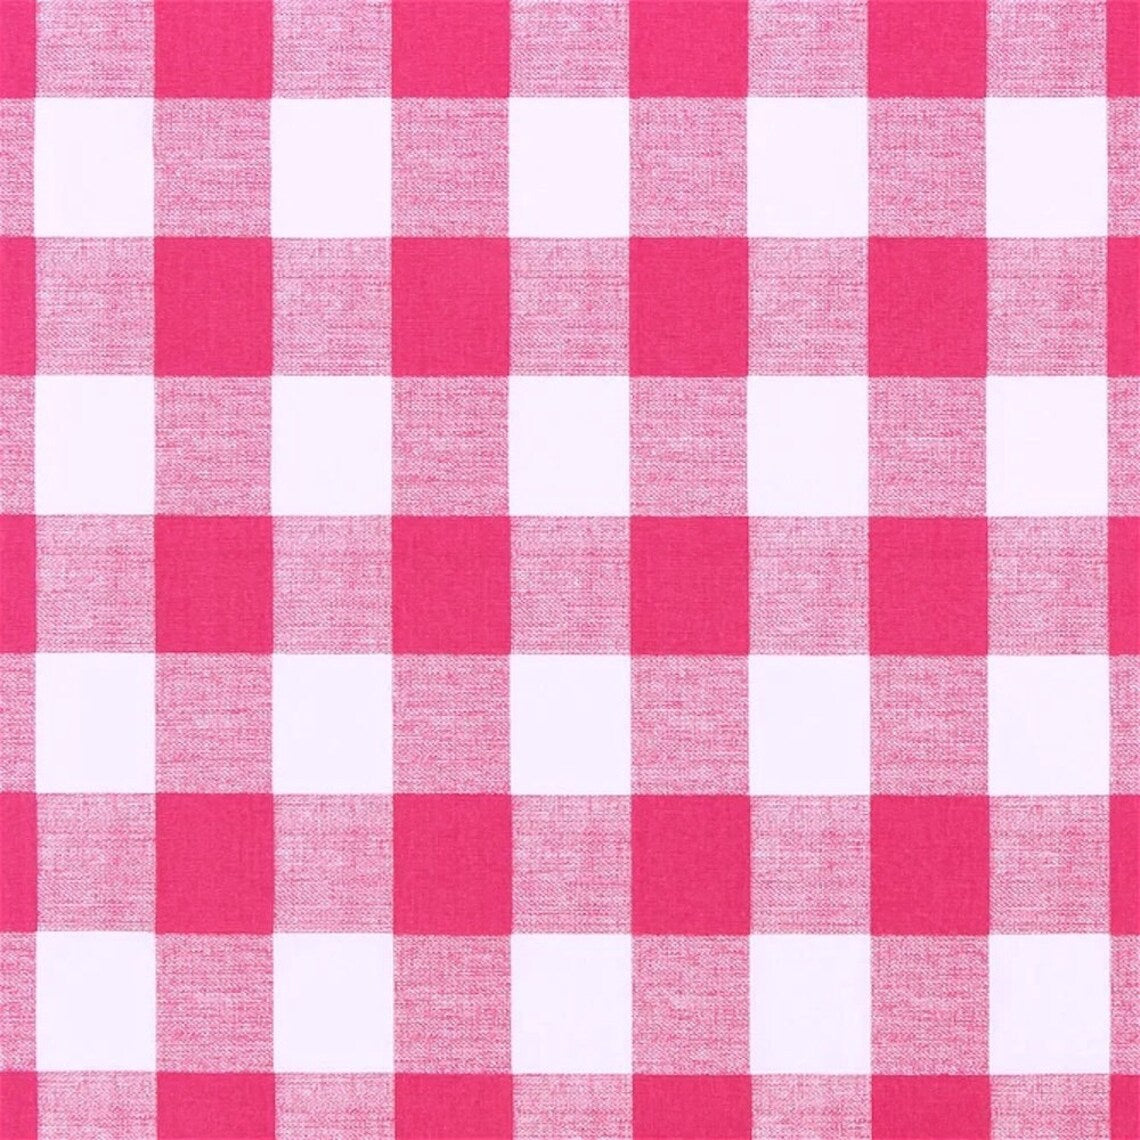 Tailored Bedskirt in Anderson Flamingo Pink Buffalo Check Plaid